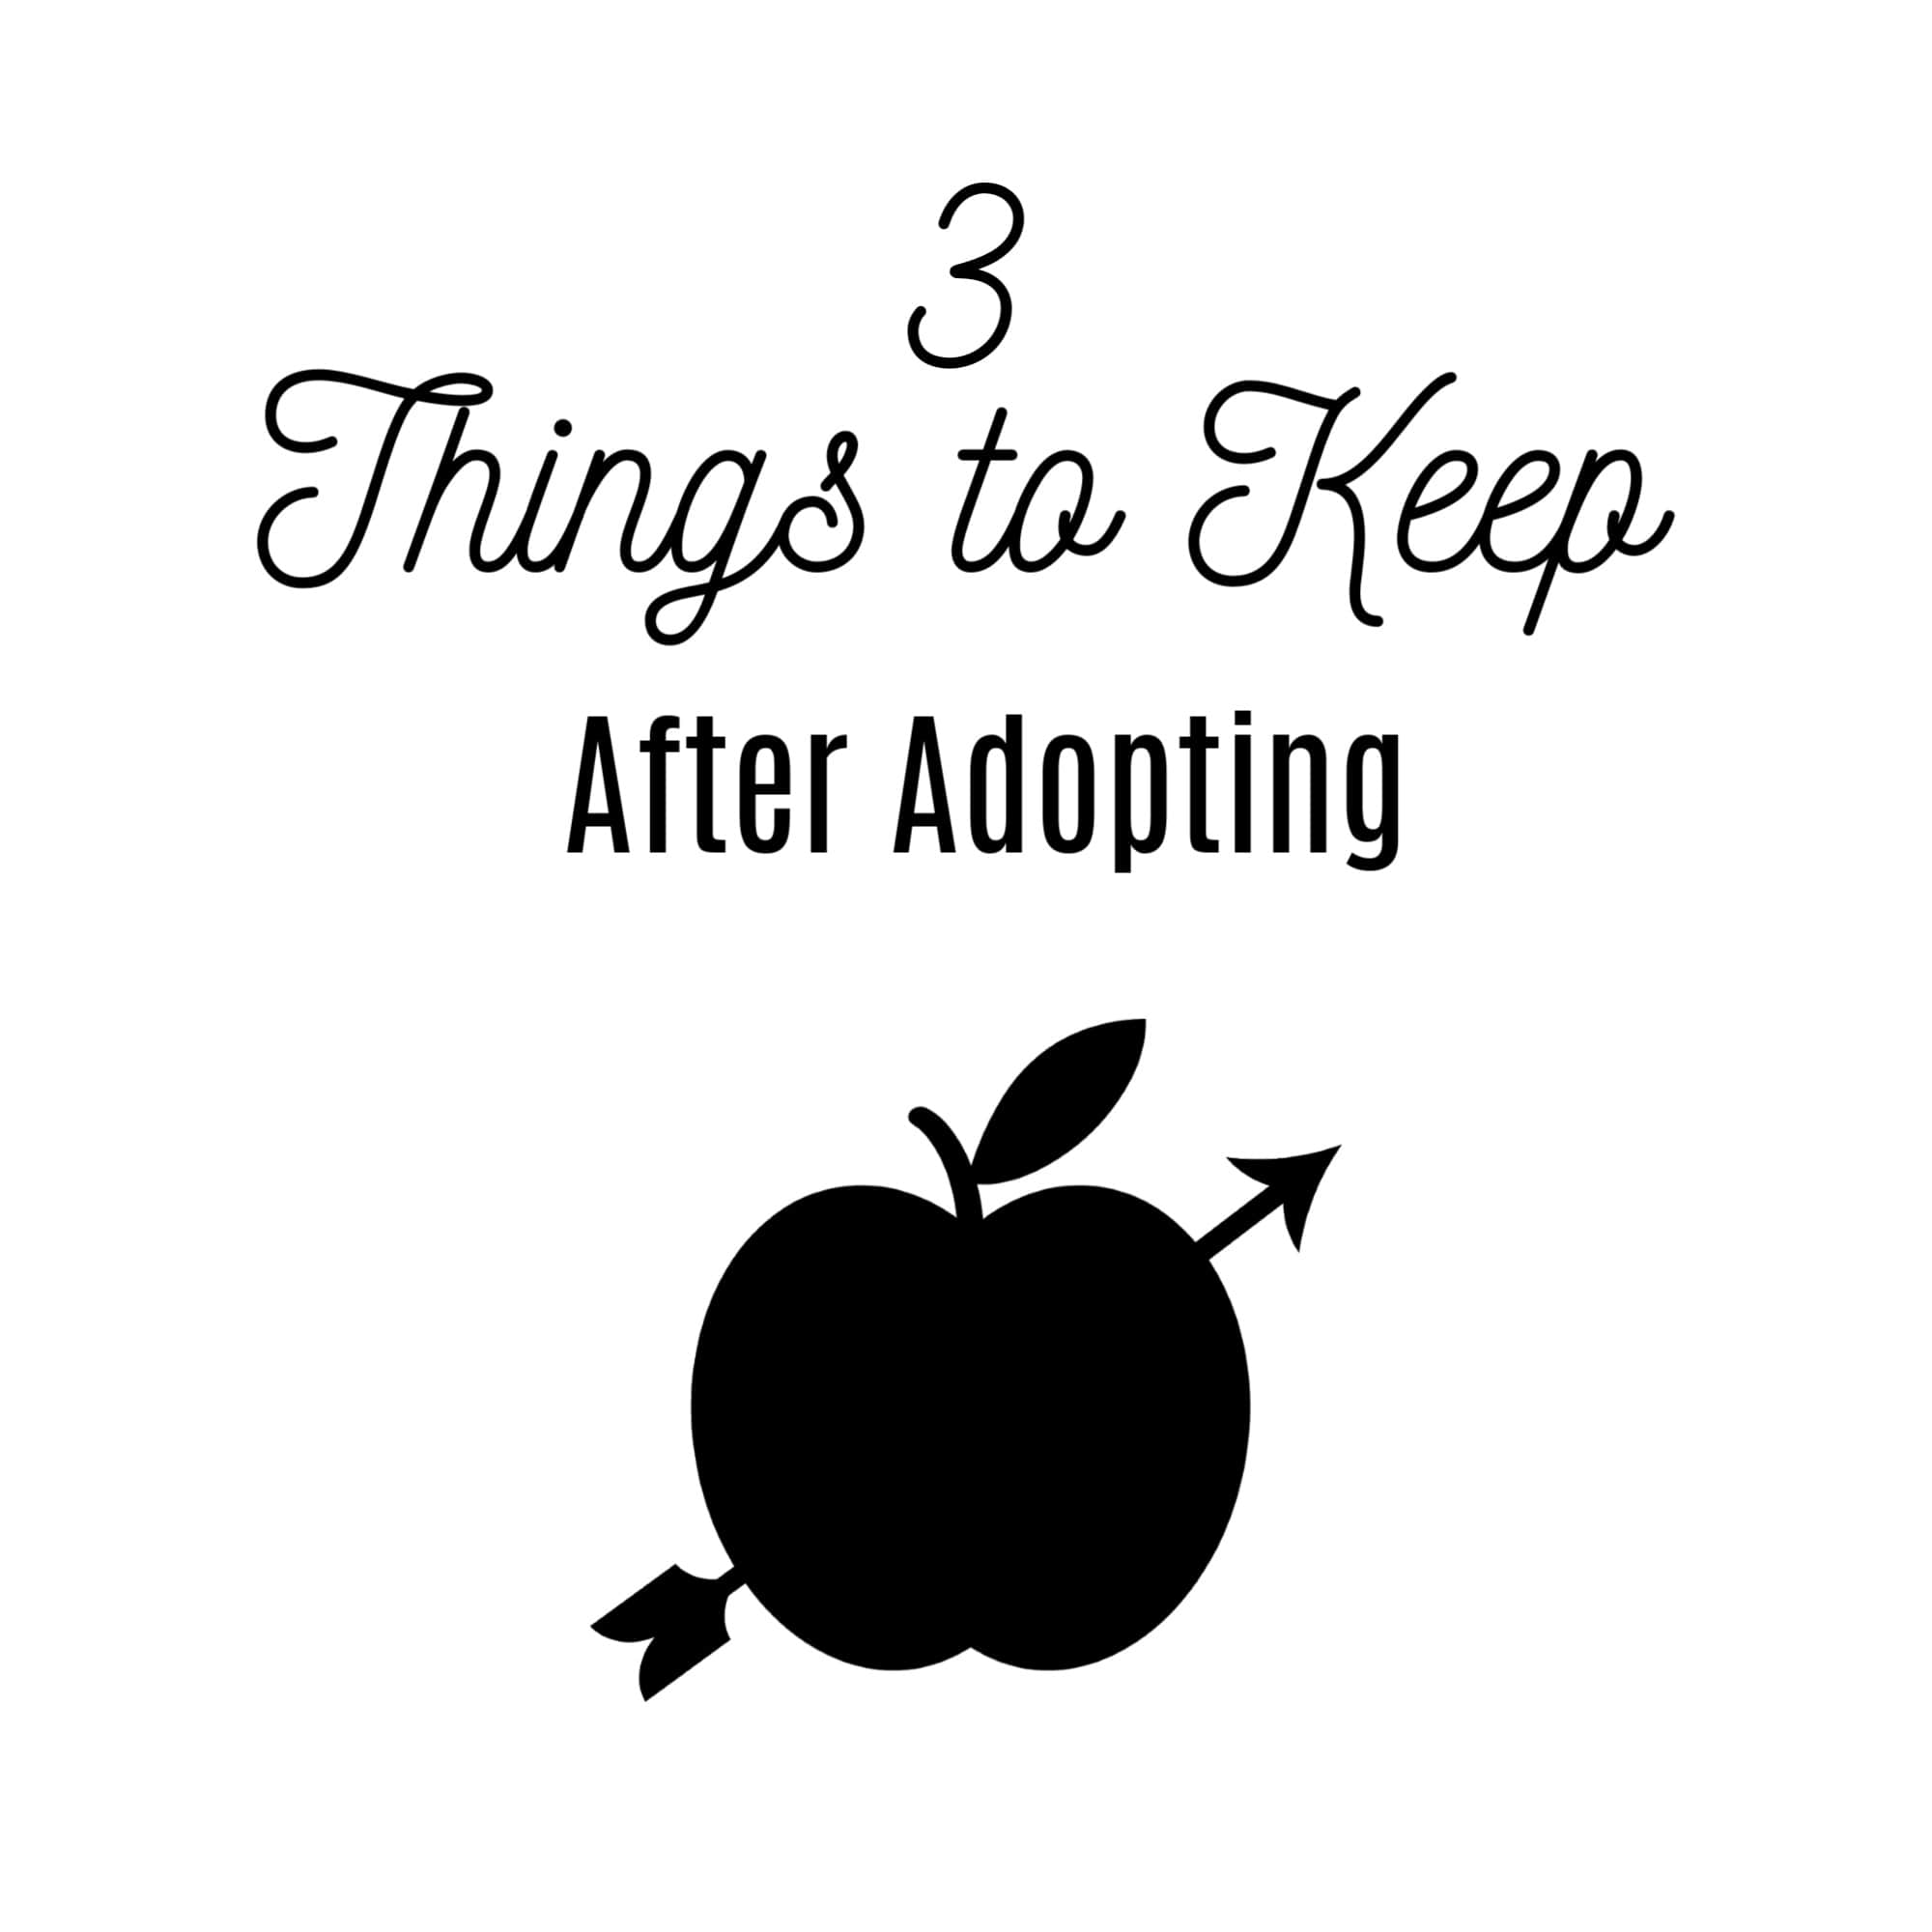 Three things you may not have thought to keep after going through the adoption process. I'm so glad I have these keepsakes for our daughter. #adoptionislove #adoptivemom #domesticadoption #infantadoption #adoptionkeepsakes #adoptivefamily